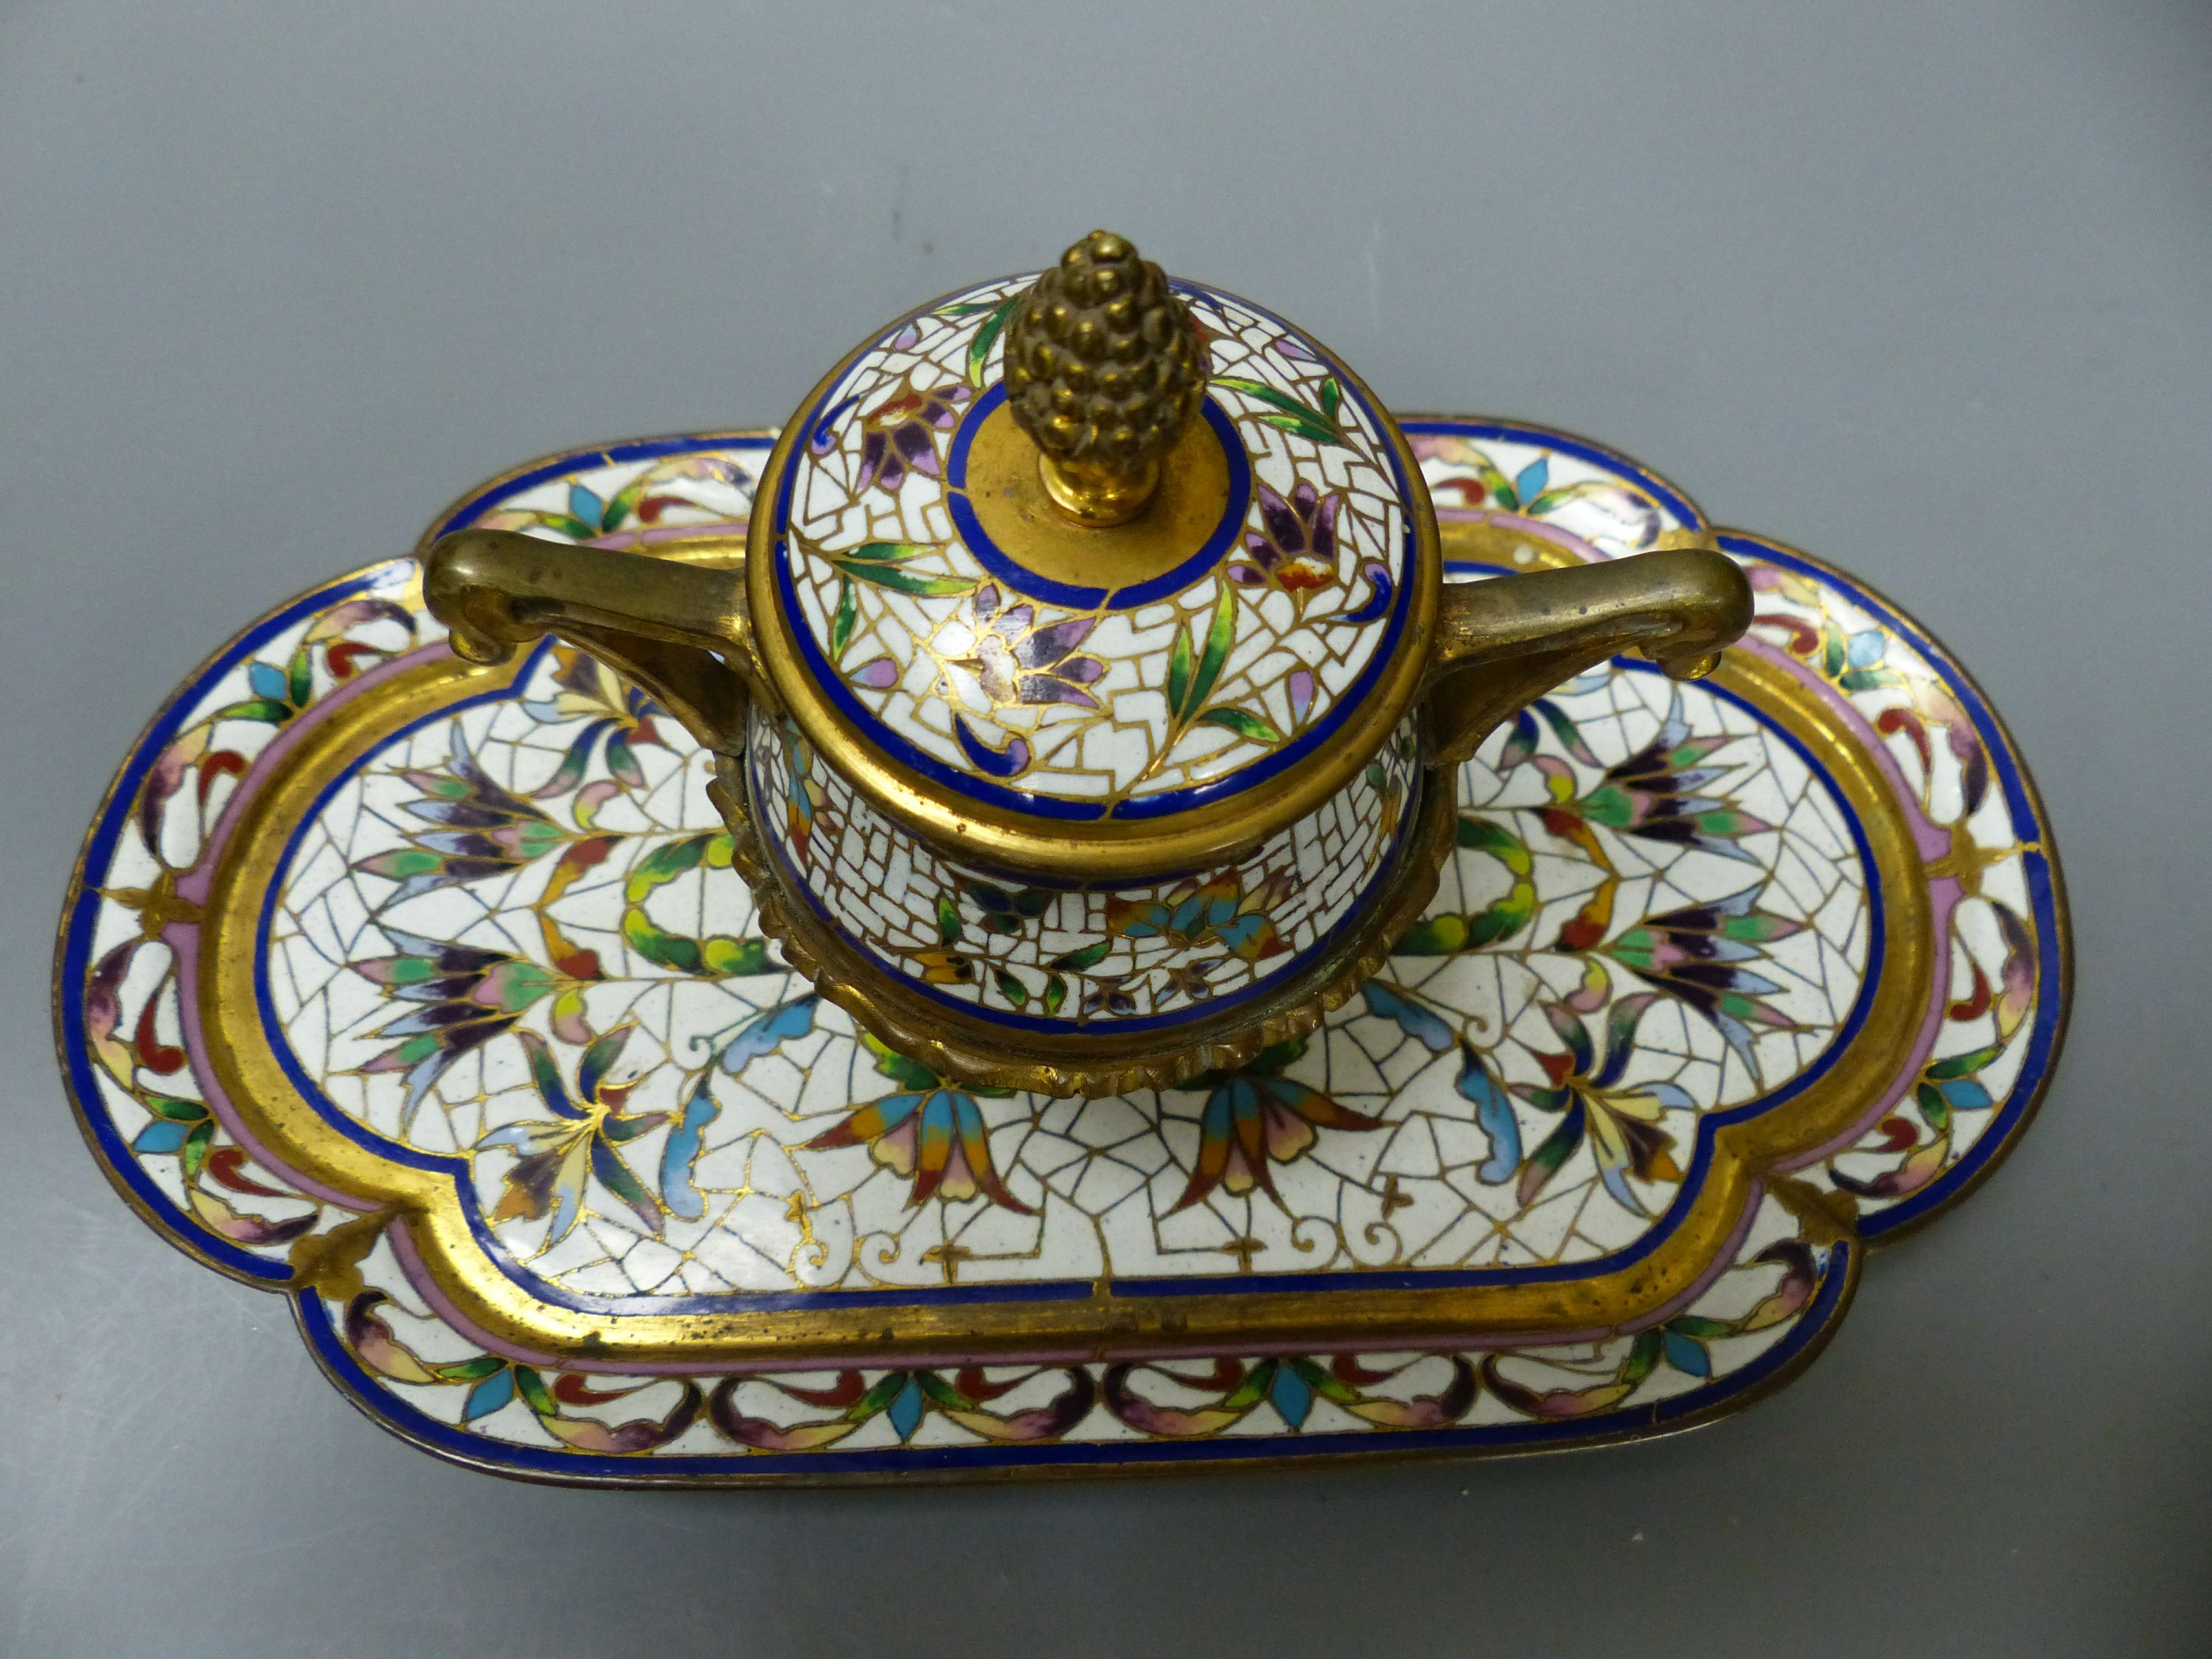 A 19th century French champleve enamel ink stand, length 24cm